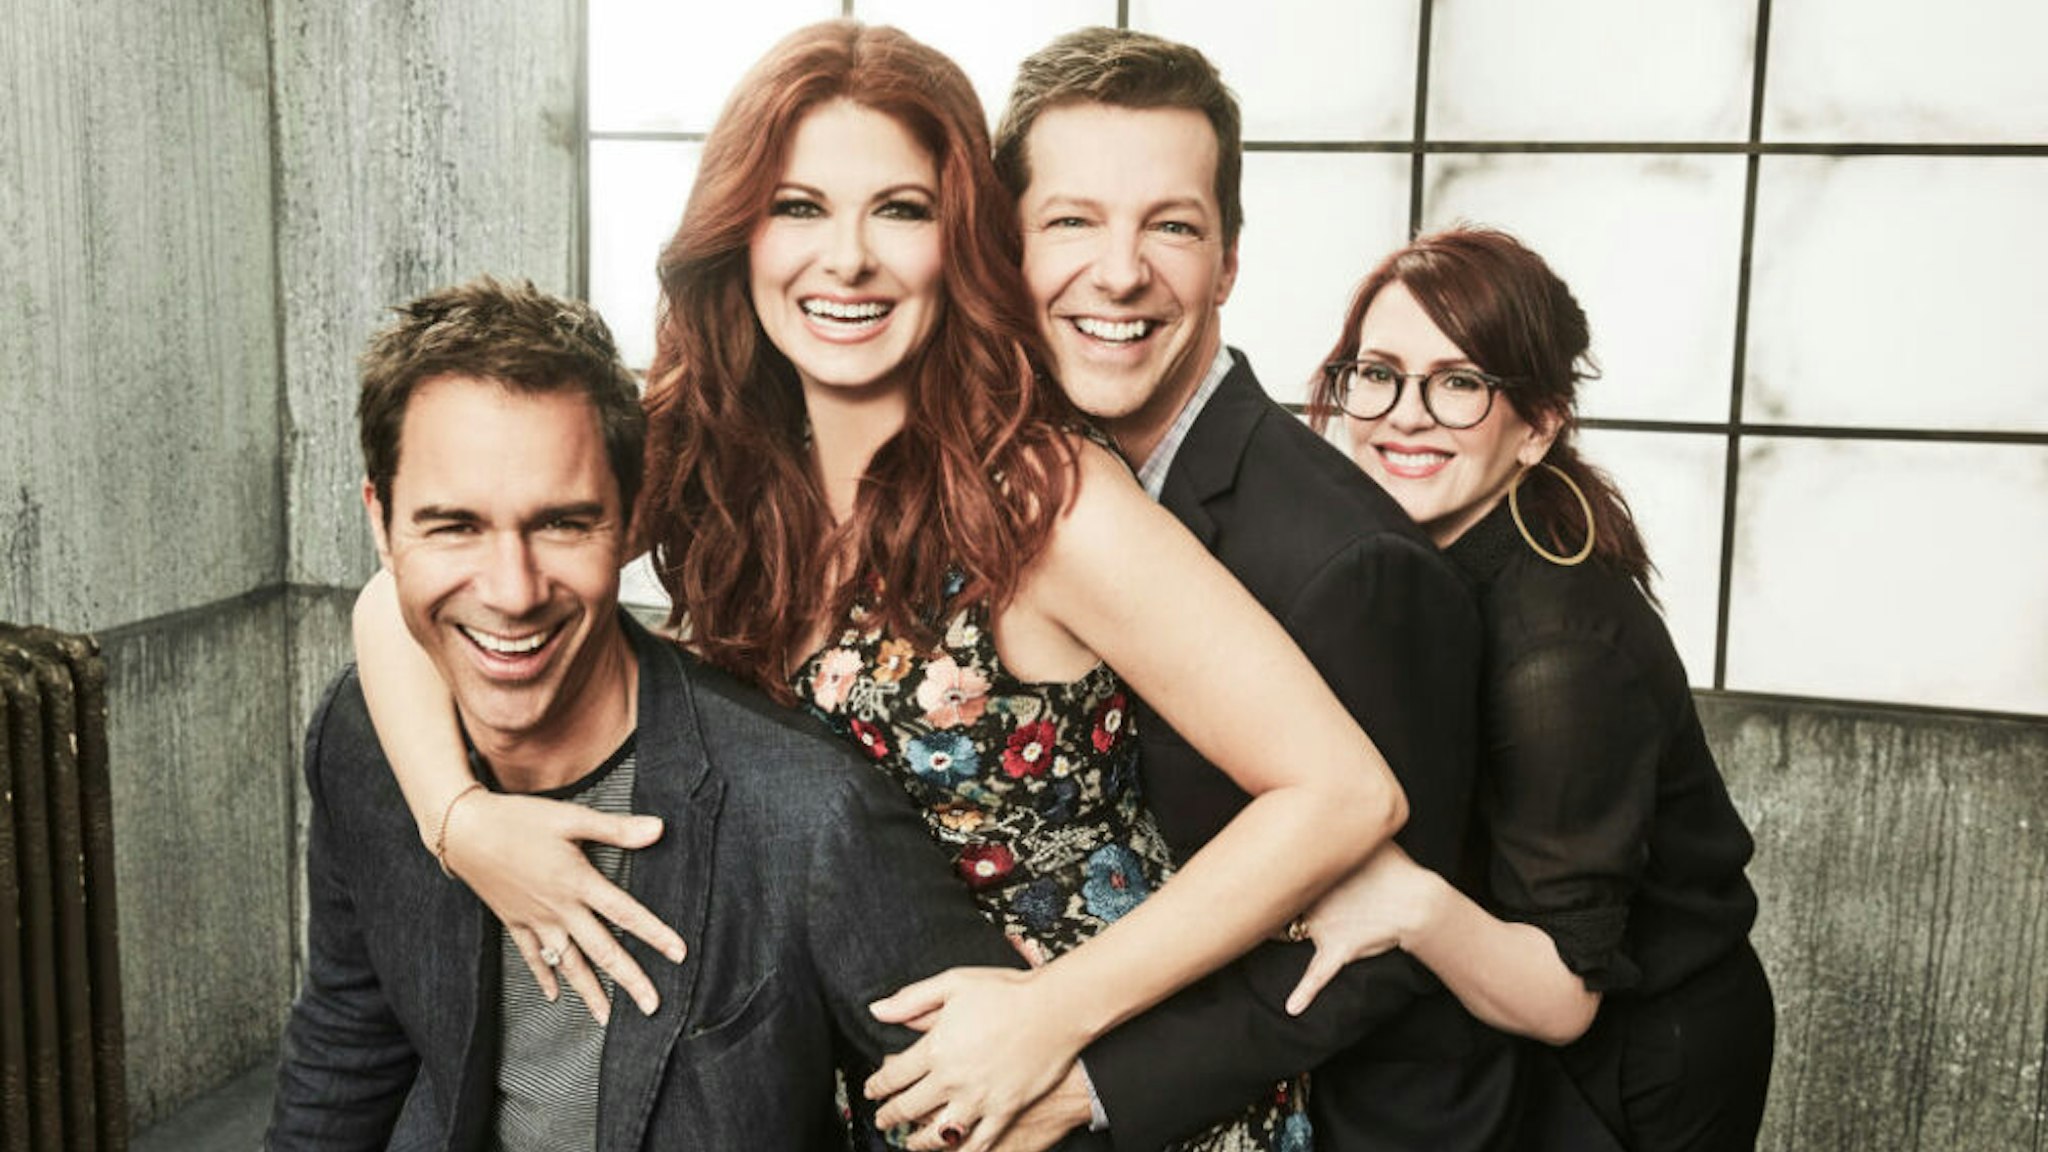 NBCUNIVERSAL EVENTS -- NBCUniversal Portrait Studio, August 2017 -- Pictured: Sean Hayes, Eric McCormack, Debra Messing, Megan Mullally, "Will &amp; Grace" --